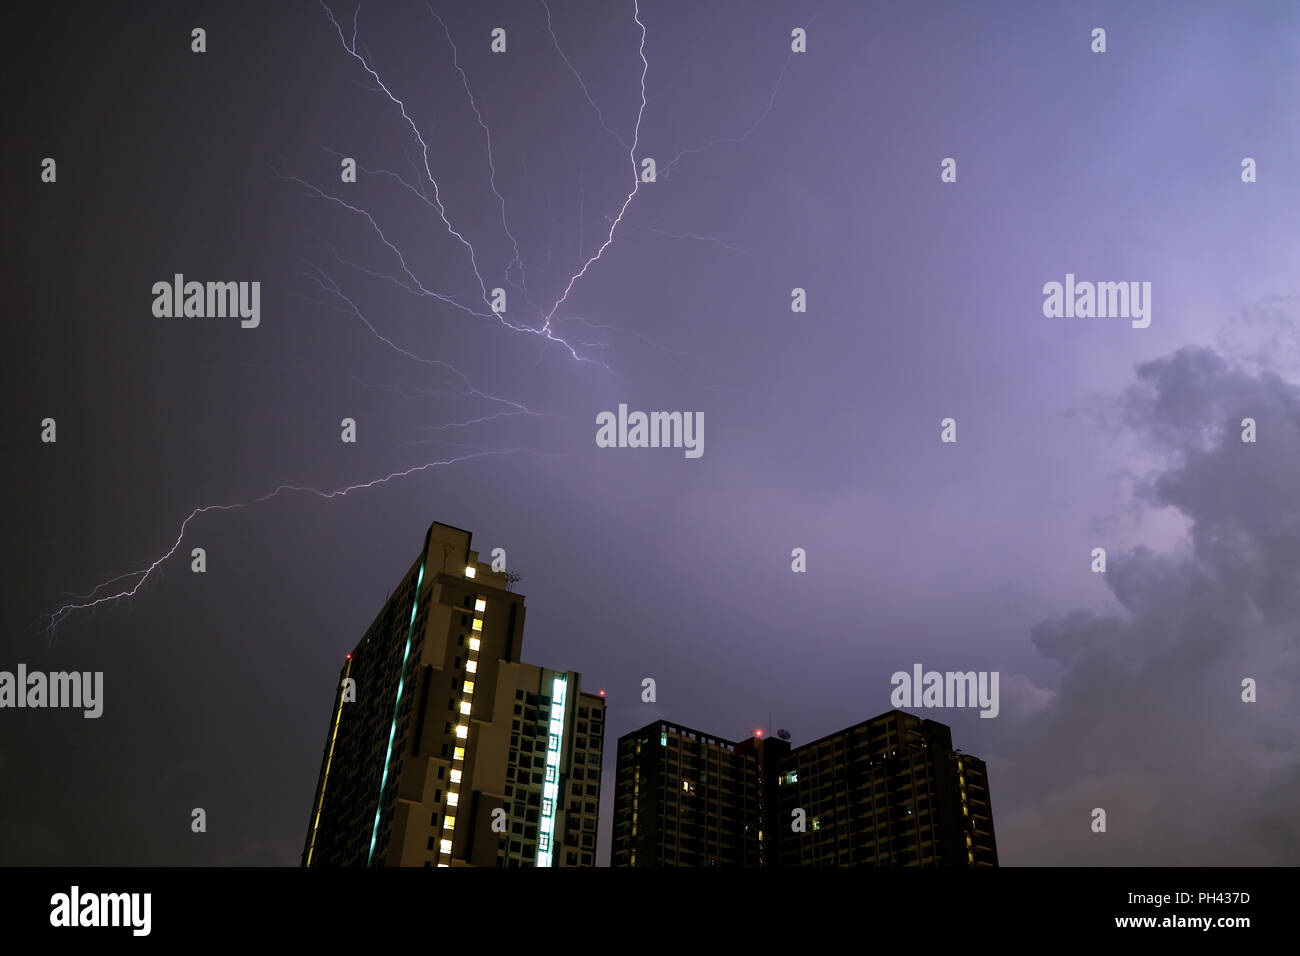 Awesome View of Real Lightning Striking on Night Sky over the High Building Stock Photo